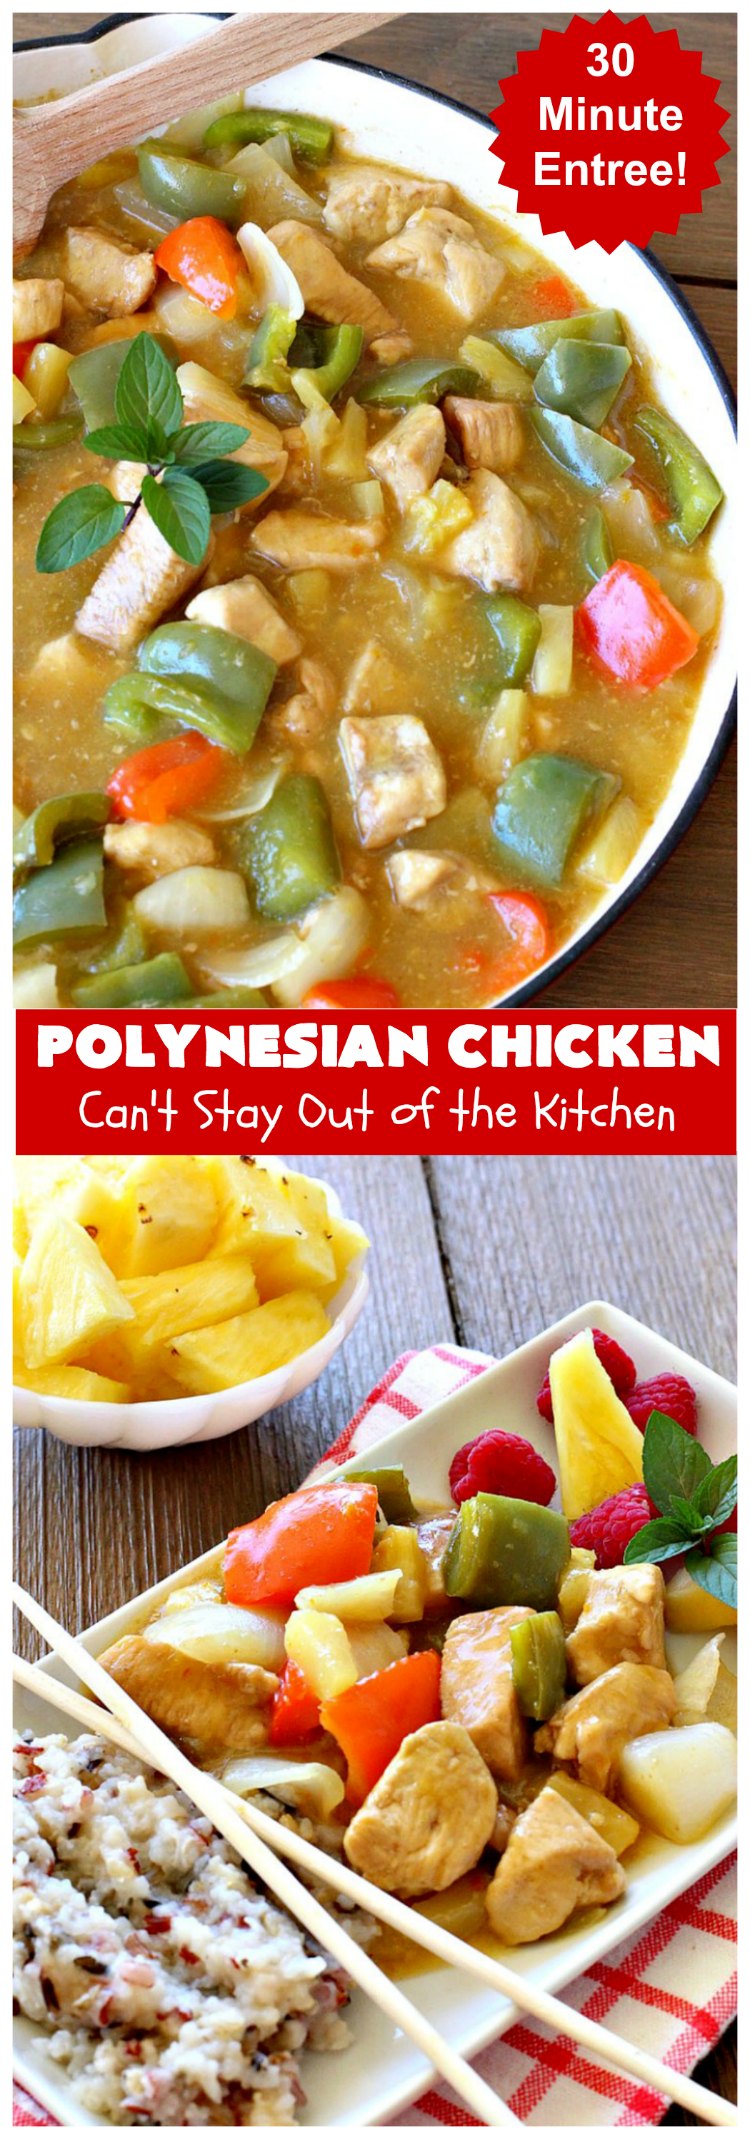 Polynesian Chicken | Can't Stay Out of the Kitchen | this quick & easy 30-minute entree is perfect for weeknight dinners when you're short on time. It's got amazing #Polynesian flavors with #pineapple & a #Caribbean sauce added to the ingredients. #GlutenFree #chicken #PolynesianChicken #30MinuteMeal